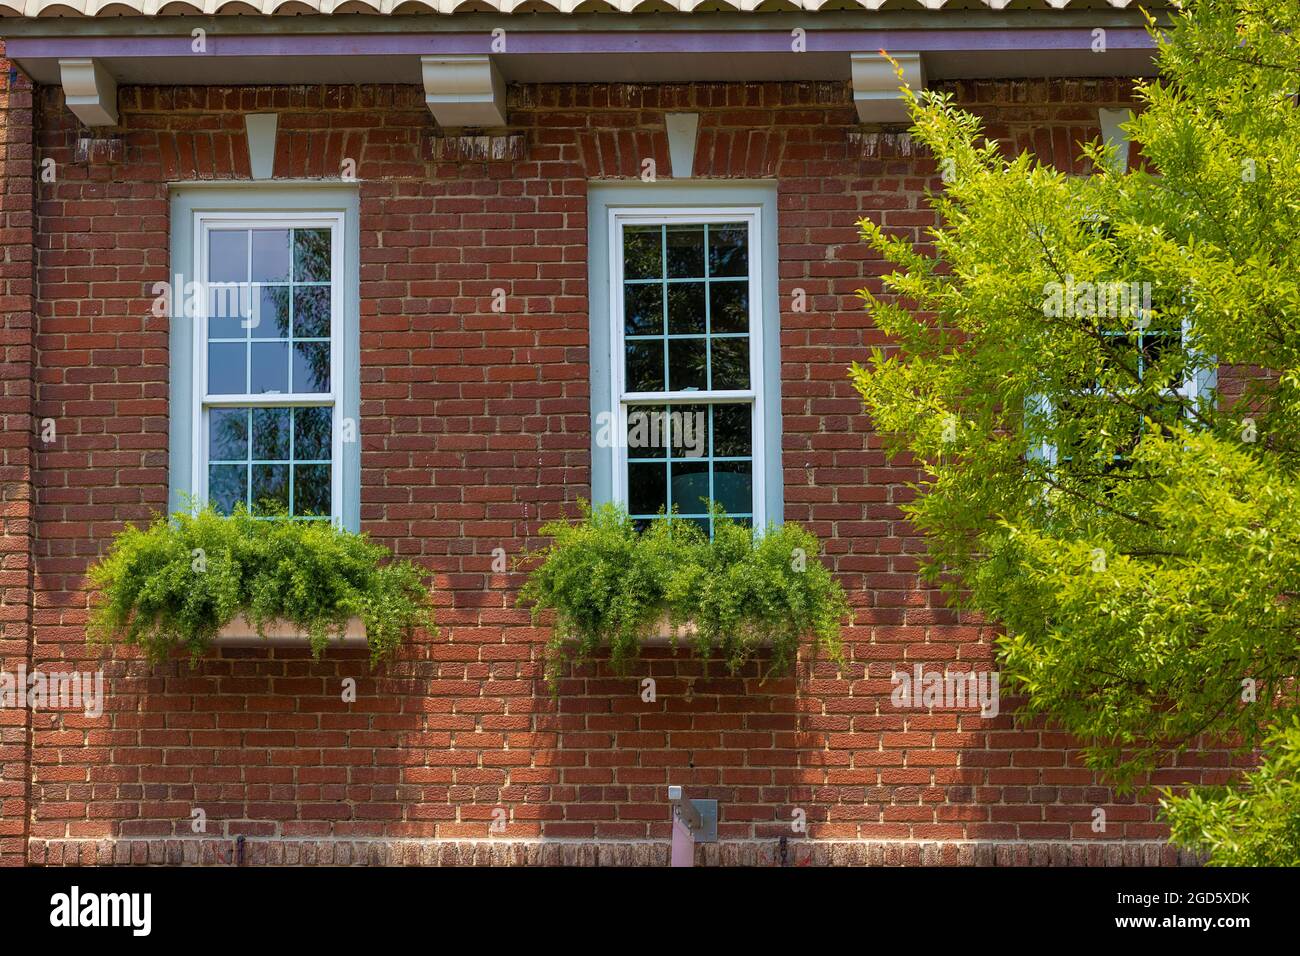 Window boxes with green plants hang on a brick building the foliage stands out agains the red color of the brick. Stock Photo